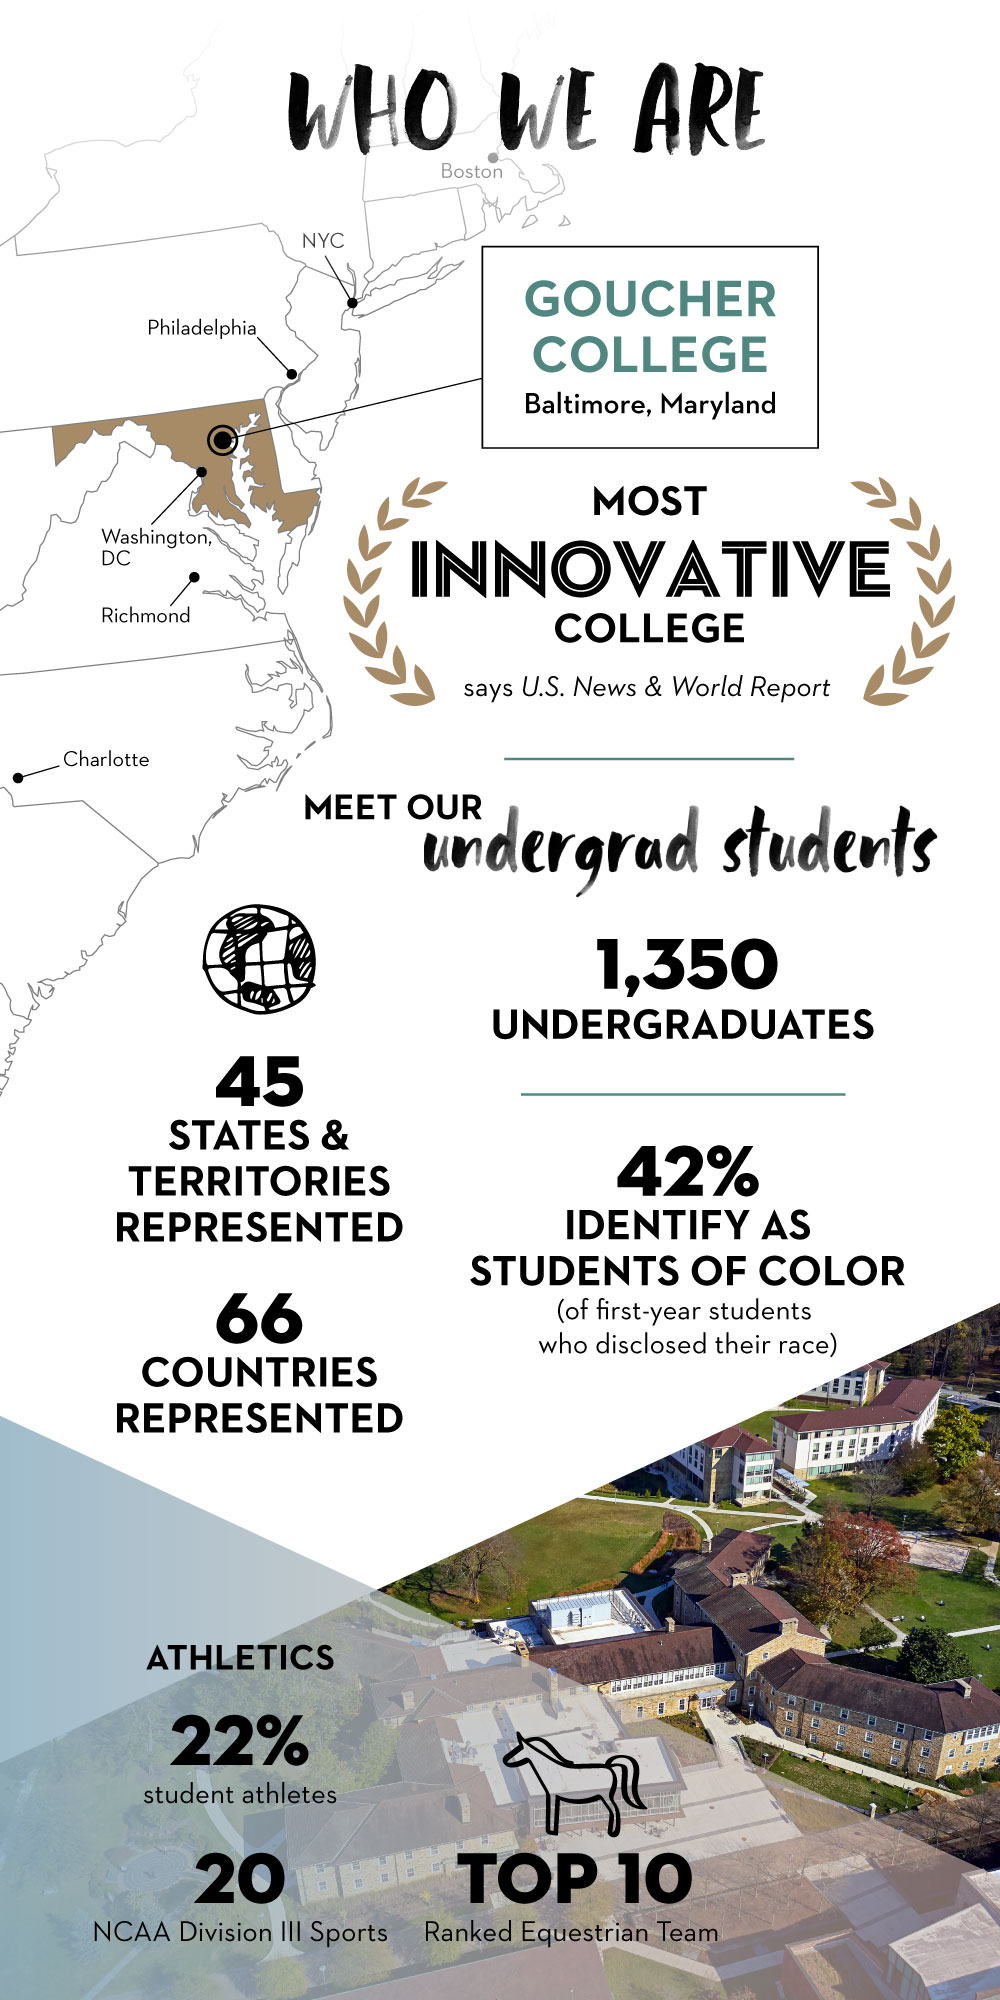 Who We Are Goucher College 1350 undergraduates 42% of students identify as students of color from 45 states and 66 countries.